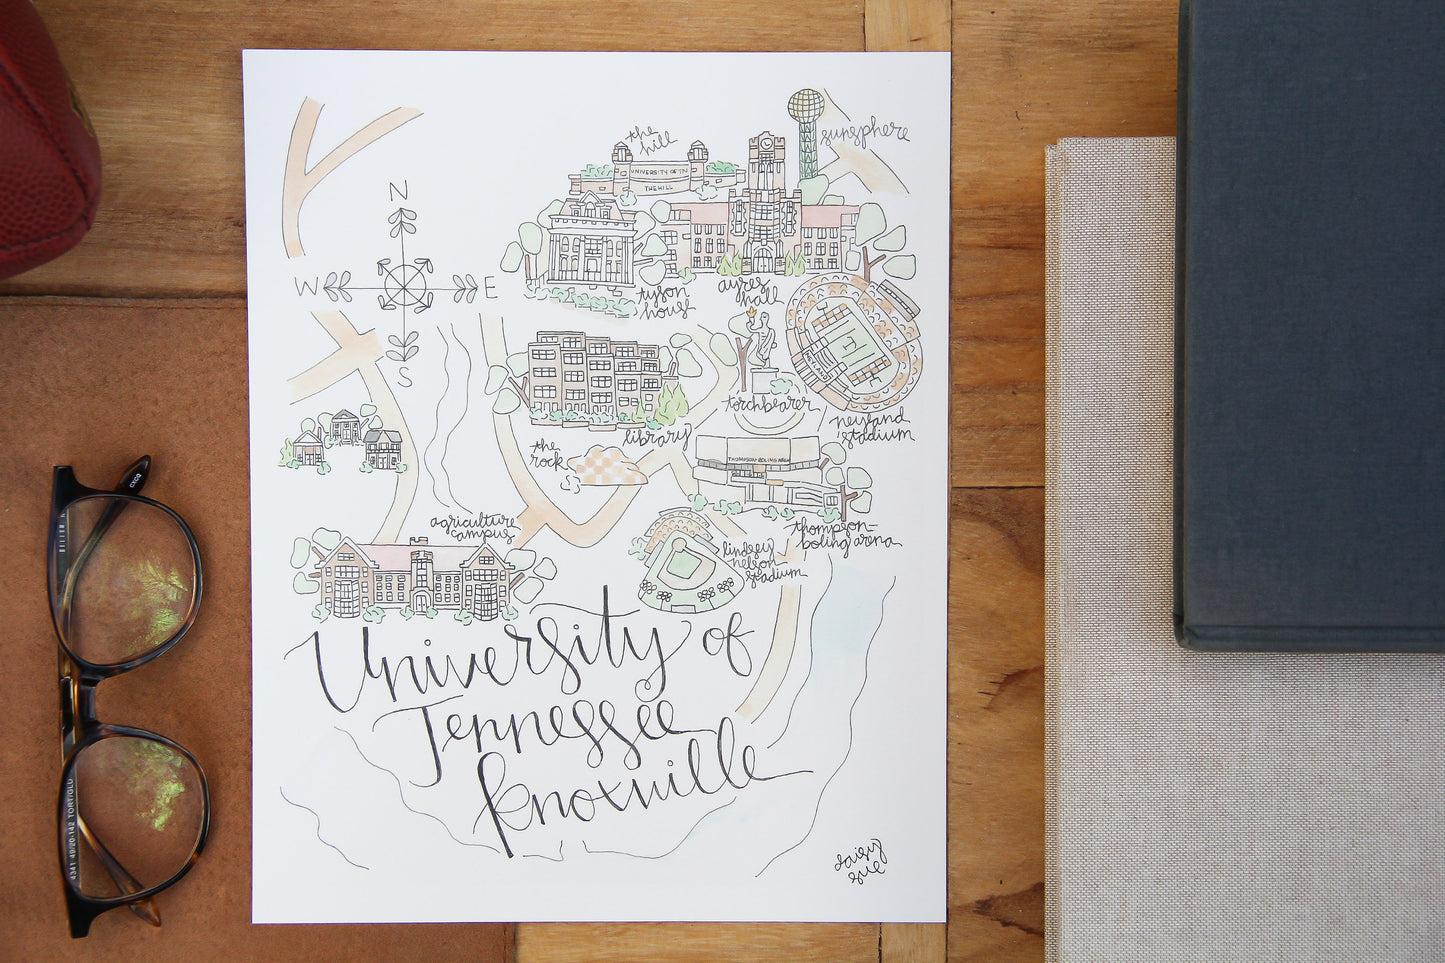 University of Tennessee Knoxville Art Print